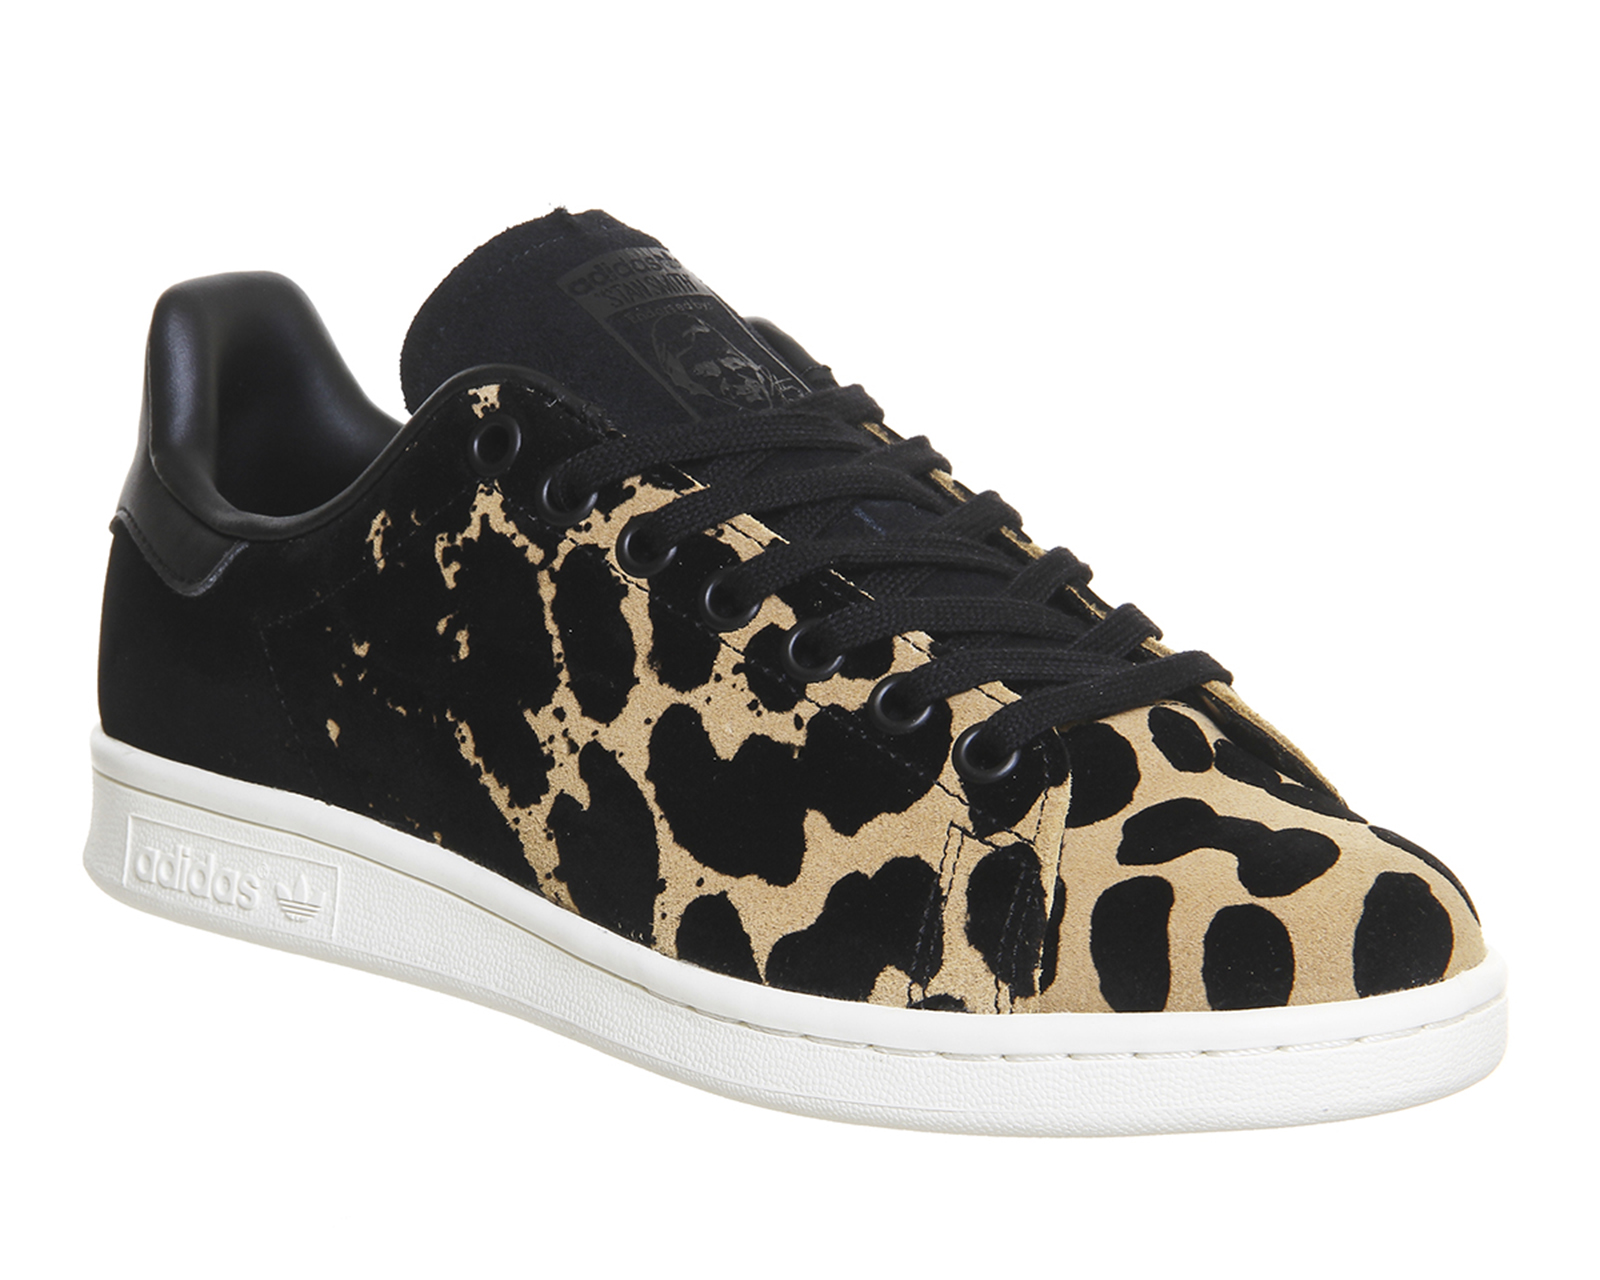 stan smith adidas leopard Online Shopping for Women, Men, Kids Fashion &  Lifestyle|Free Delivery & Returns! -